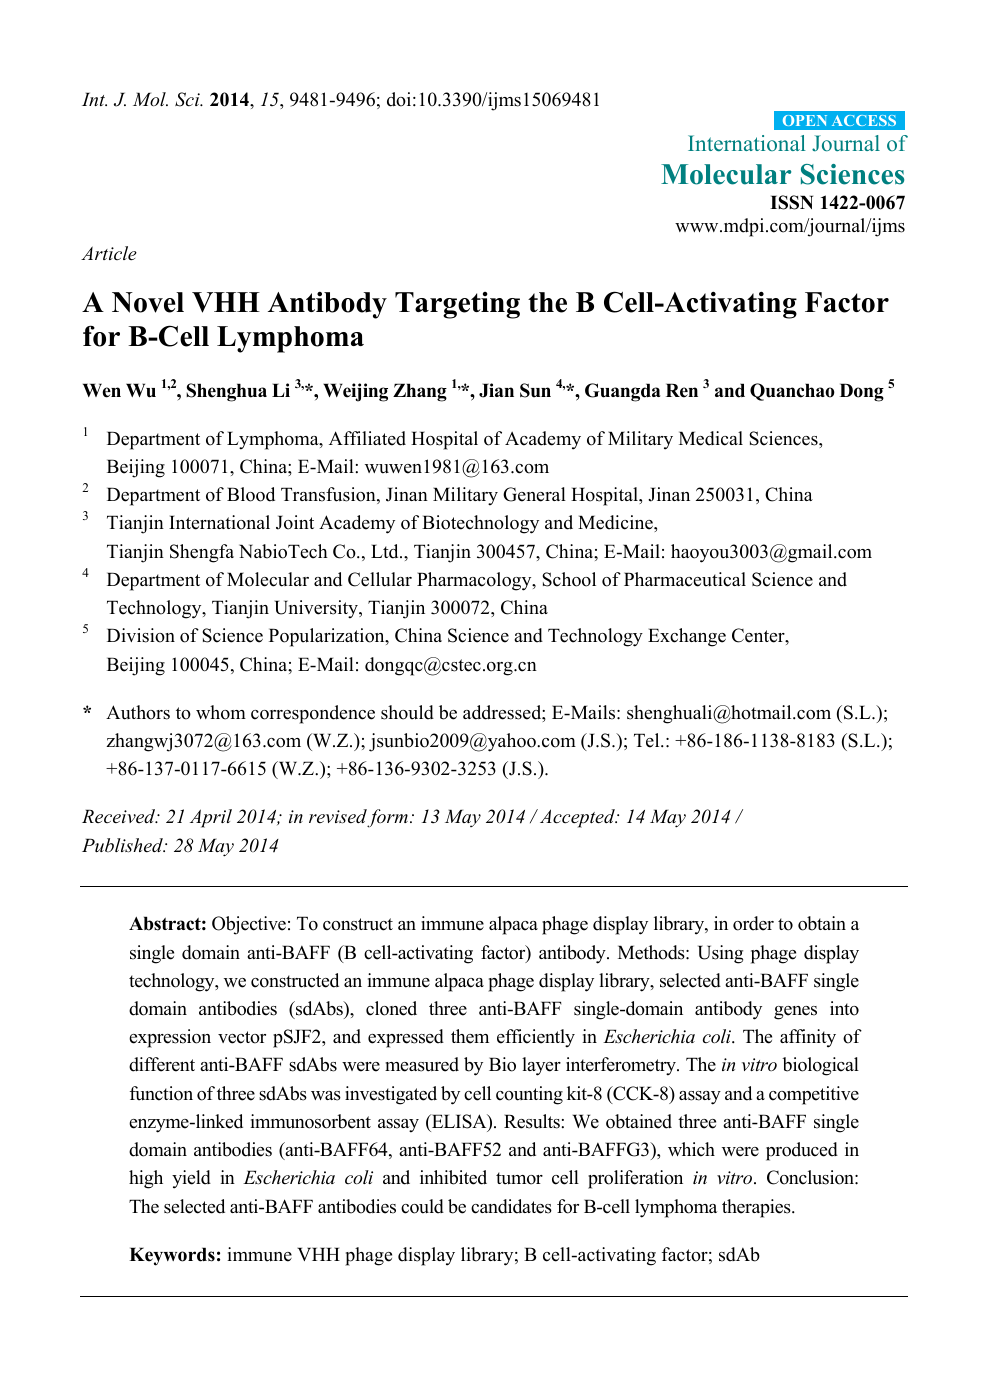 A Novel Vhh Antibody Targeting The B Cell Activating Factor For B Cell Lymphoma Topic Of Research Paper In Biological Sciences Download Scholarly Article Pdf And Read For Free On Cyberleninka Open Science